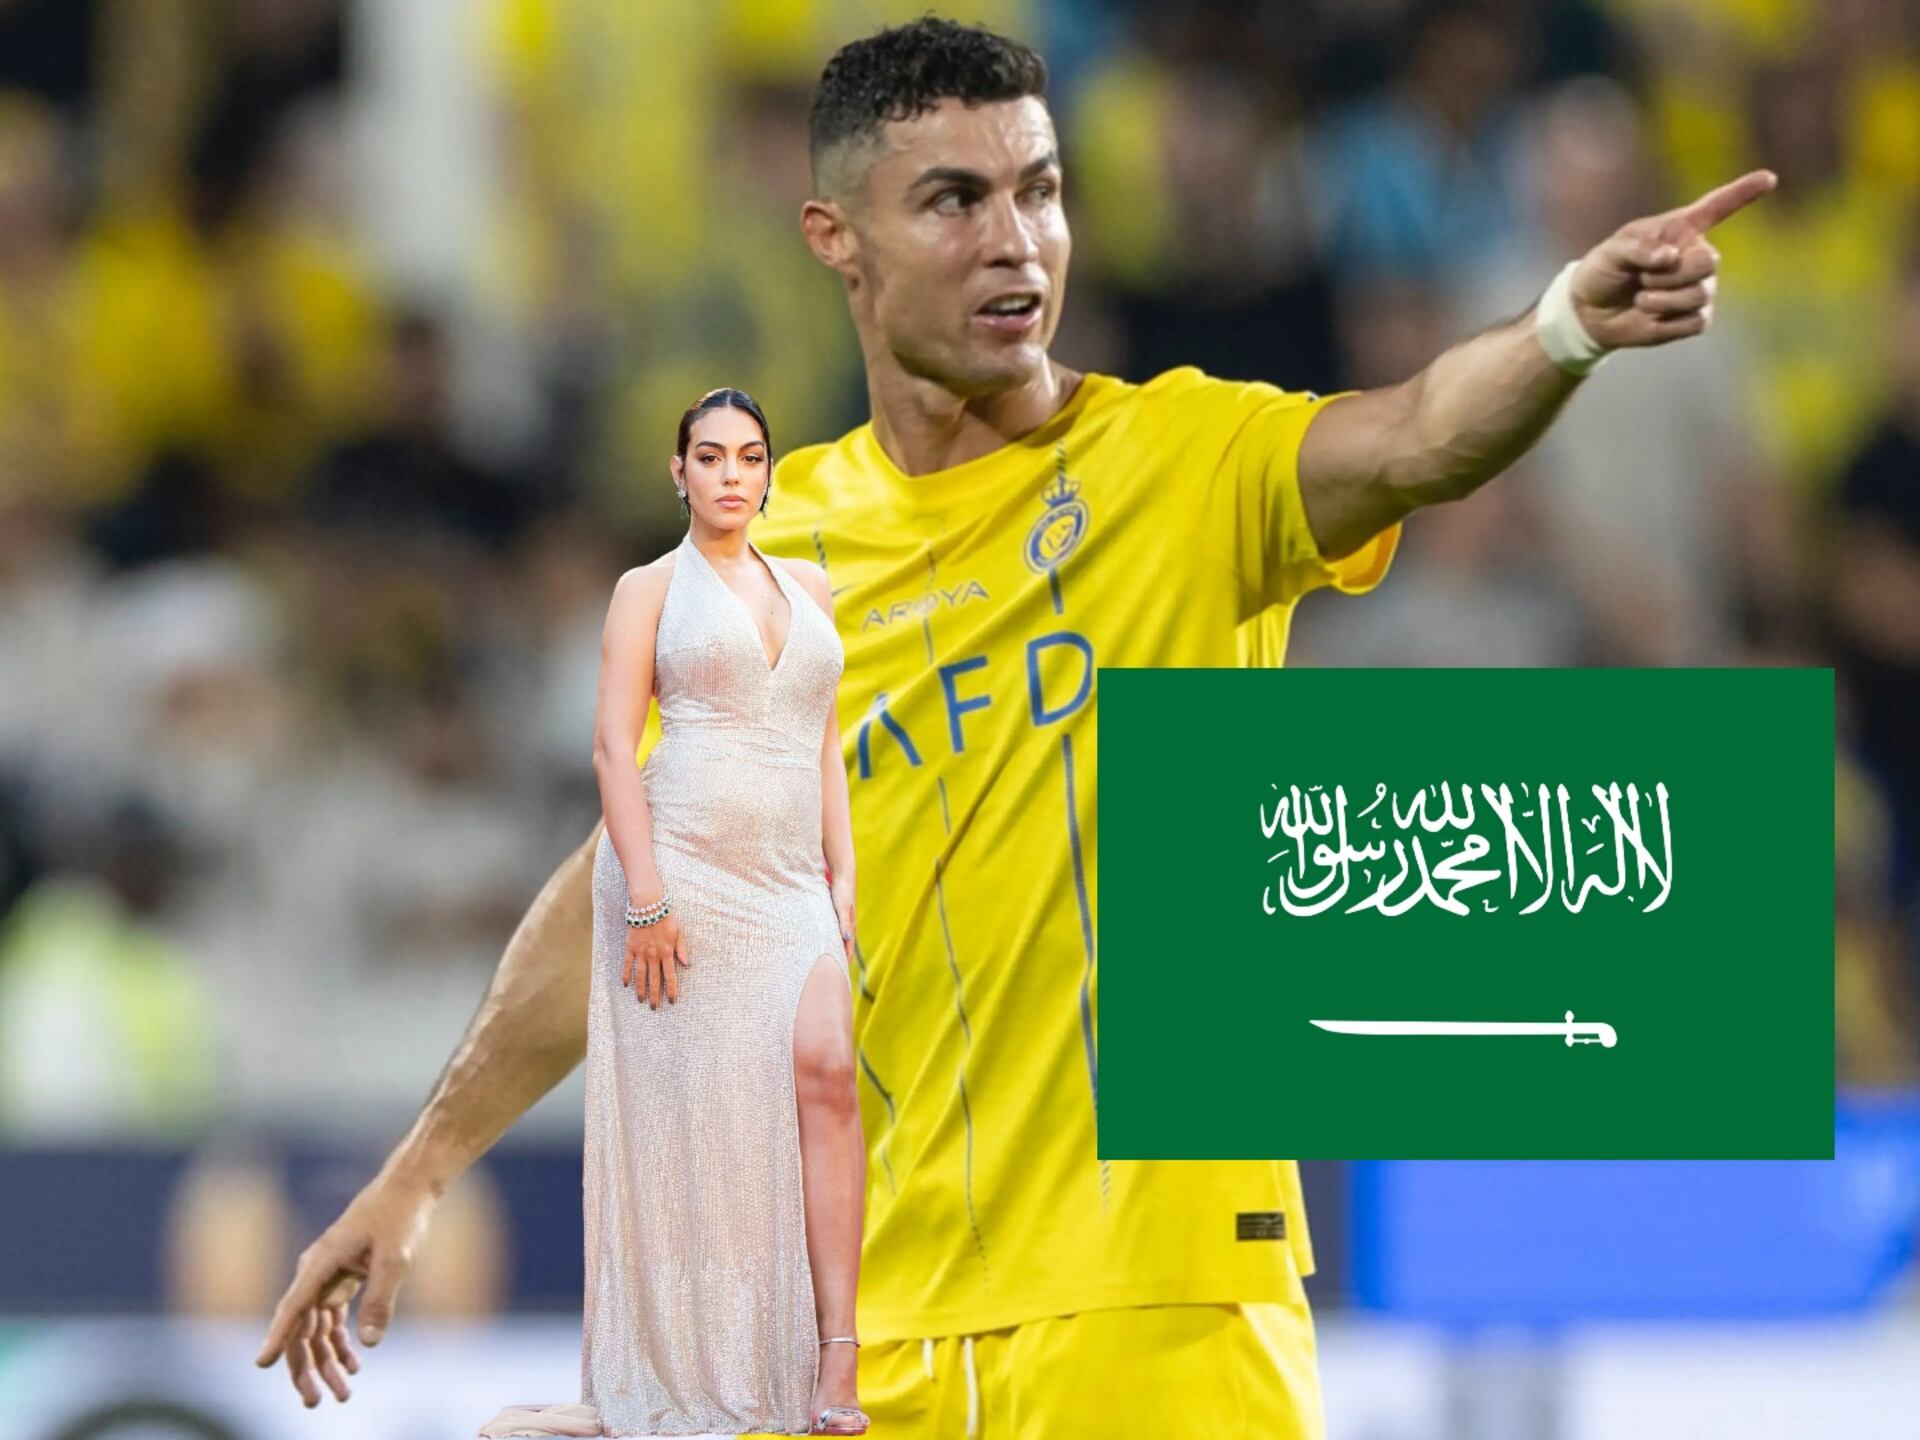 While Cristiano was upset with Arabia and looks at options, Georgina's opinion about Saudi that surprises CR7 